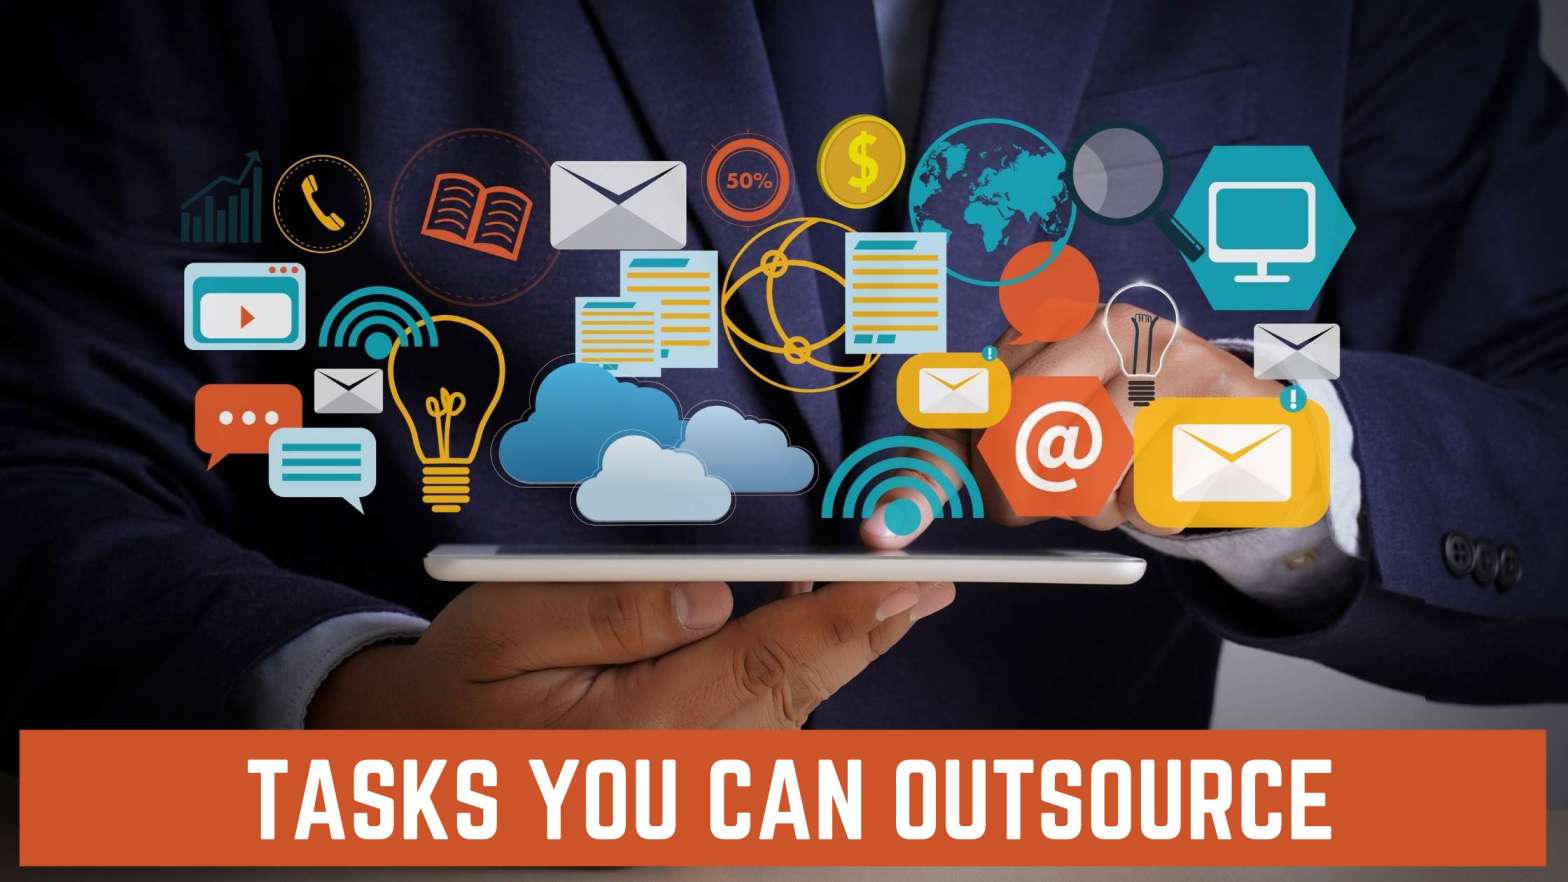 Tasks You Can Outsource to Grow Your Business